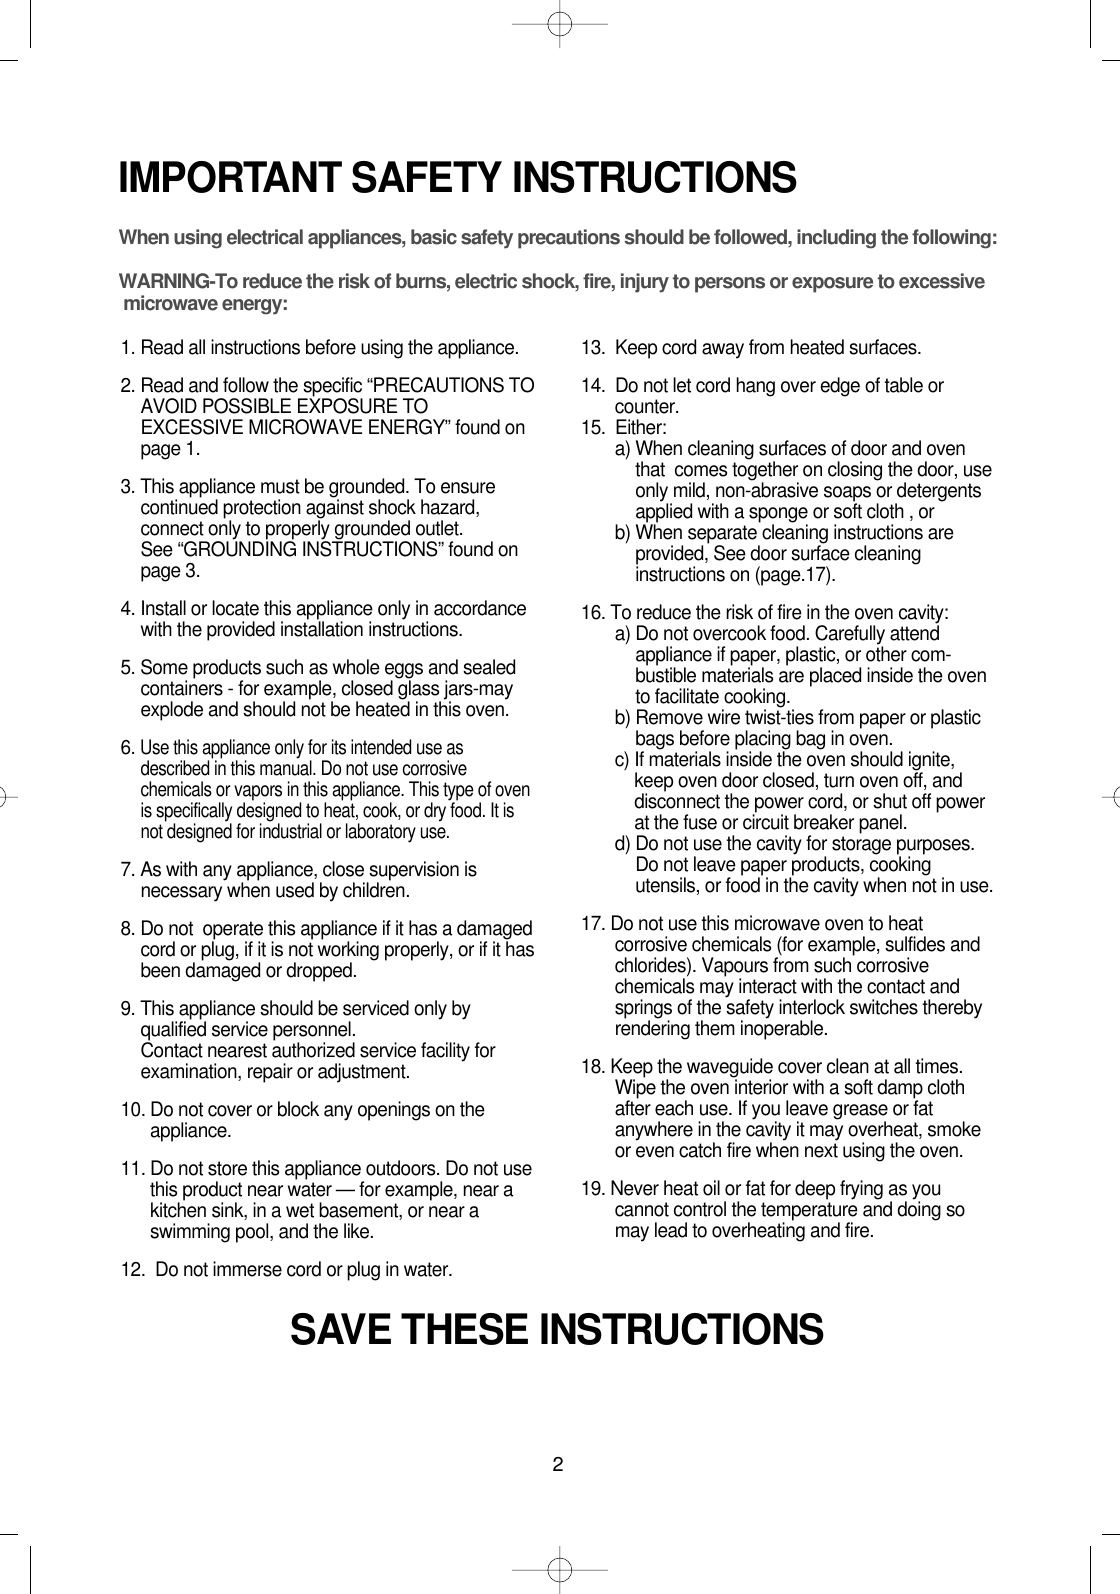 2IMPORTANT SAFETY INSTRUCTIONSWhen using electrical appliances, basic safety precautions should be followed, including the following:WARNING-To reduce the risk of burns, electric shock, fire, injury to persons or exposure to excessive microwave energy:1. Read all instructions before using the appliance.2. Read and follow the specific “PRECAUTIONS TOAVOID POSSIBLE EXPOSURE TOEXCESSIVE MICROWAVE ENERGY” found onpage 1.3. This appliance must be grounded. To ensurecontinued protection against shock hazard,connect only to properly grounded outlet. See “GROUNDING INSTRUCTIONS” found onpage 3.4. Install or locate this appliance only in accordancewith the provided installation instructions.5. Some products such as whole eggs and sealedcontainers - for example, closed glass jars-mayexplode and should not be heated in this oven.6. Use this appliance only for its intended use asdescribed in this manual. Do not use corrosivechemicals or vapors in this appliance. This type of ovenis specifically designed to heat, cook, or dry food. It isnot designed for industrial or laboratory use.7. As with any appliance, close supervision isnecessary when used by children.8. Do not  operate this appliance if it has a damagedcord or plug, if it is not working properly, or if it hasbeen damaged or dropped.9. This appliance should be serviced only byqualified service personnel. Contact nearest authorized service facility forexamination, repair or adjustment.10. Do not cover or block any openings on theappliance. 11. Do not store this appliance outdoors. Do not usethis product near water — for example, near akitchen sink, in a wet basement, or near aswimming pool, and the like.12.  Do not immerse cord or plug in water.13.  Keep cord away from heated surfaces.14.  Do not let cord hang over edge of table orcounter.15.  Either:a) When cleaning surfaces of door and oventhat  comes together on closing the door, useonly mild, non-abrasive soaps or detergentsapplied with a sponge or soft cloth , orb) When separate cleaning instructions areprovided, See door surface cleaninginstructions on (page.17).16. To reduce the risk of fire in the oven cavity:a) Do not overcook food. Carefully attendappliance if paper, plastic, or other com-bustible materials are placed inside the ovento facilitate cooking.b) Remove wire twist-ties from paper or plasticbags before placing bag in oven.c) If materials inside the oven should ignite,keep oven door closed, turn oven off, anddisconnect the power cord, or shut off powerat the fuse or circuit breaker panel.d) Do not use the cavity for storage purposes.Do not leave paper products, cookingutensils, or food in the cavity when not in use.17. Do not use this microwave oven to heatcorrosive chemicals (for example, sulfides andchlorides). Vapours from such corrosivechemicals may interact with the contact andsprings of the safety interlock switches therebyrendering them inoperable.18. Keep the waveguide cover clean at all times.Wipe the oven interior with a soft damp clothafter each use. If you leave grease or fatanywhere in the cavity it may overheat, smokeor even catch fire when next using the oven.19. Never heat oil or fat for deep frying as youcannot control the temperature and doing somay lead to overheating and fire.SAVE THESE INSTRUCTIONS